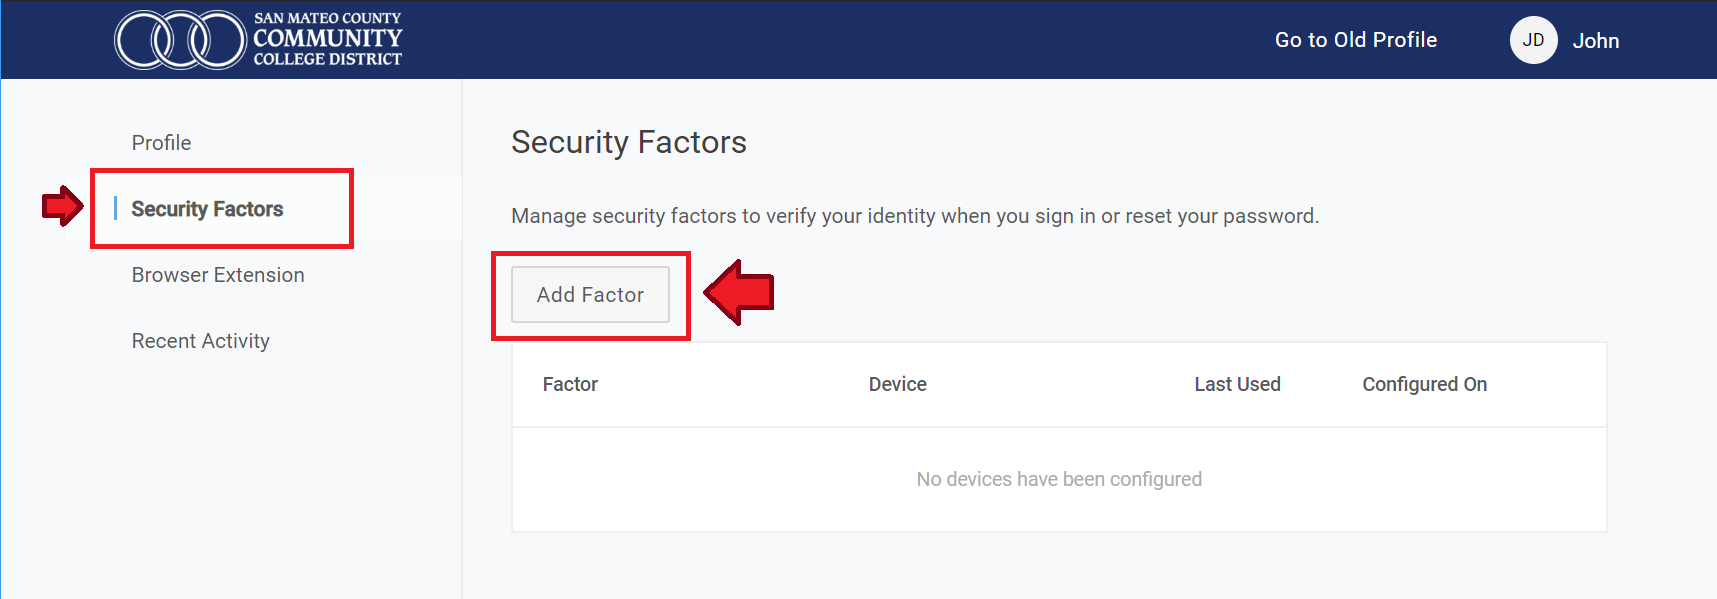 Security Factor side menu and Add Factor button hightlighted